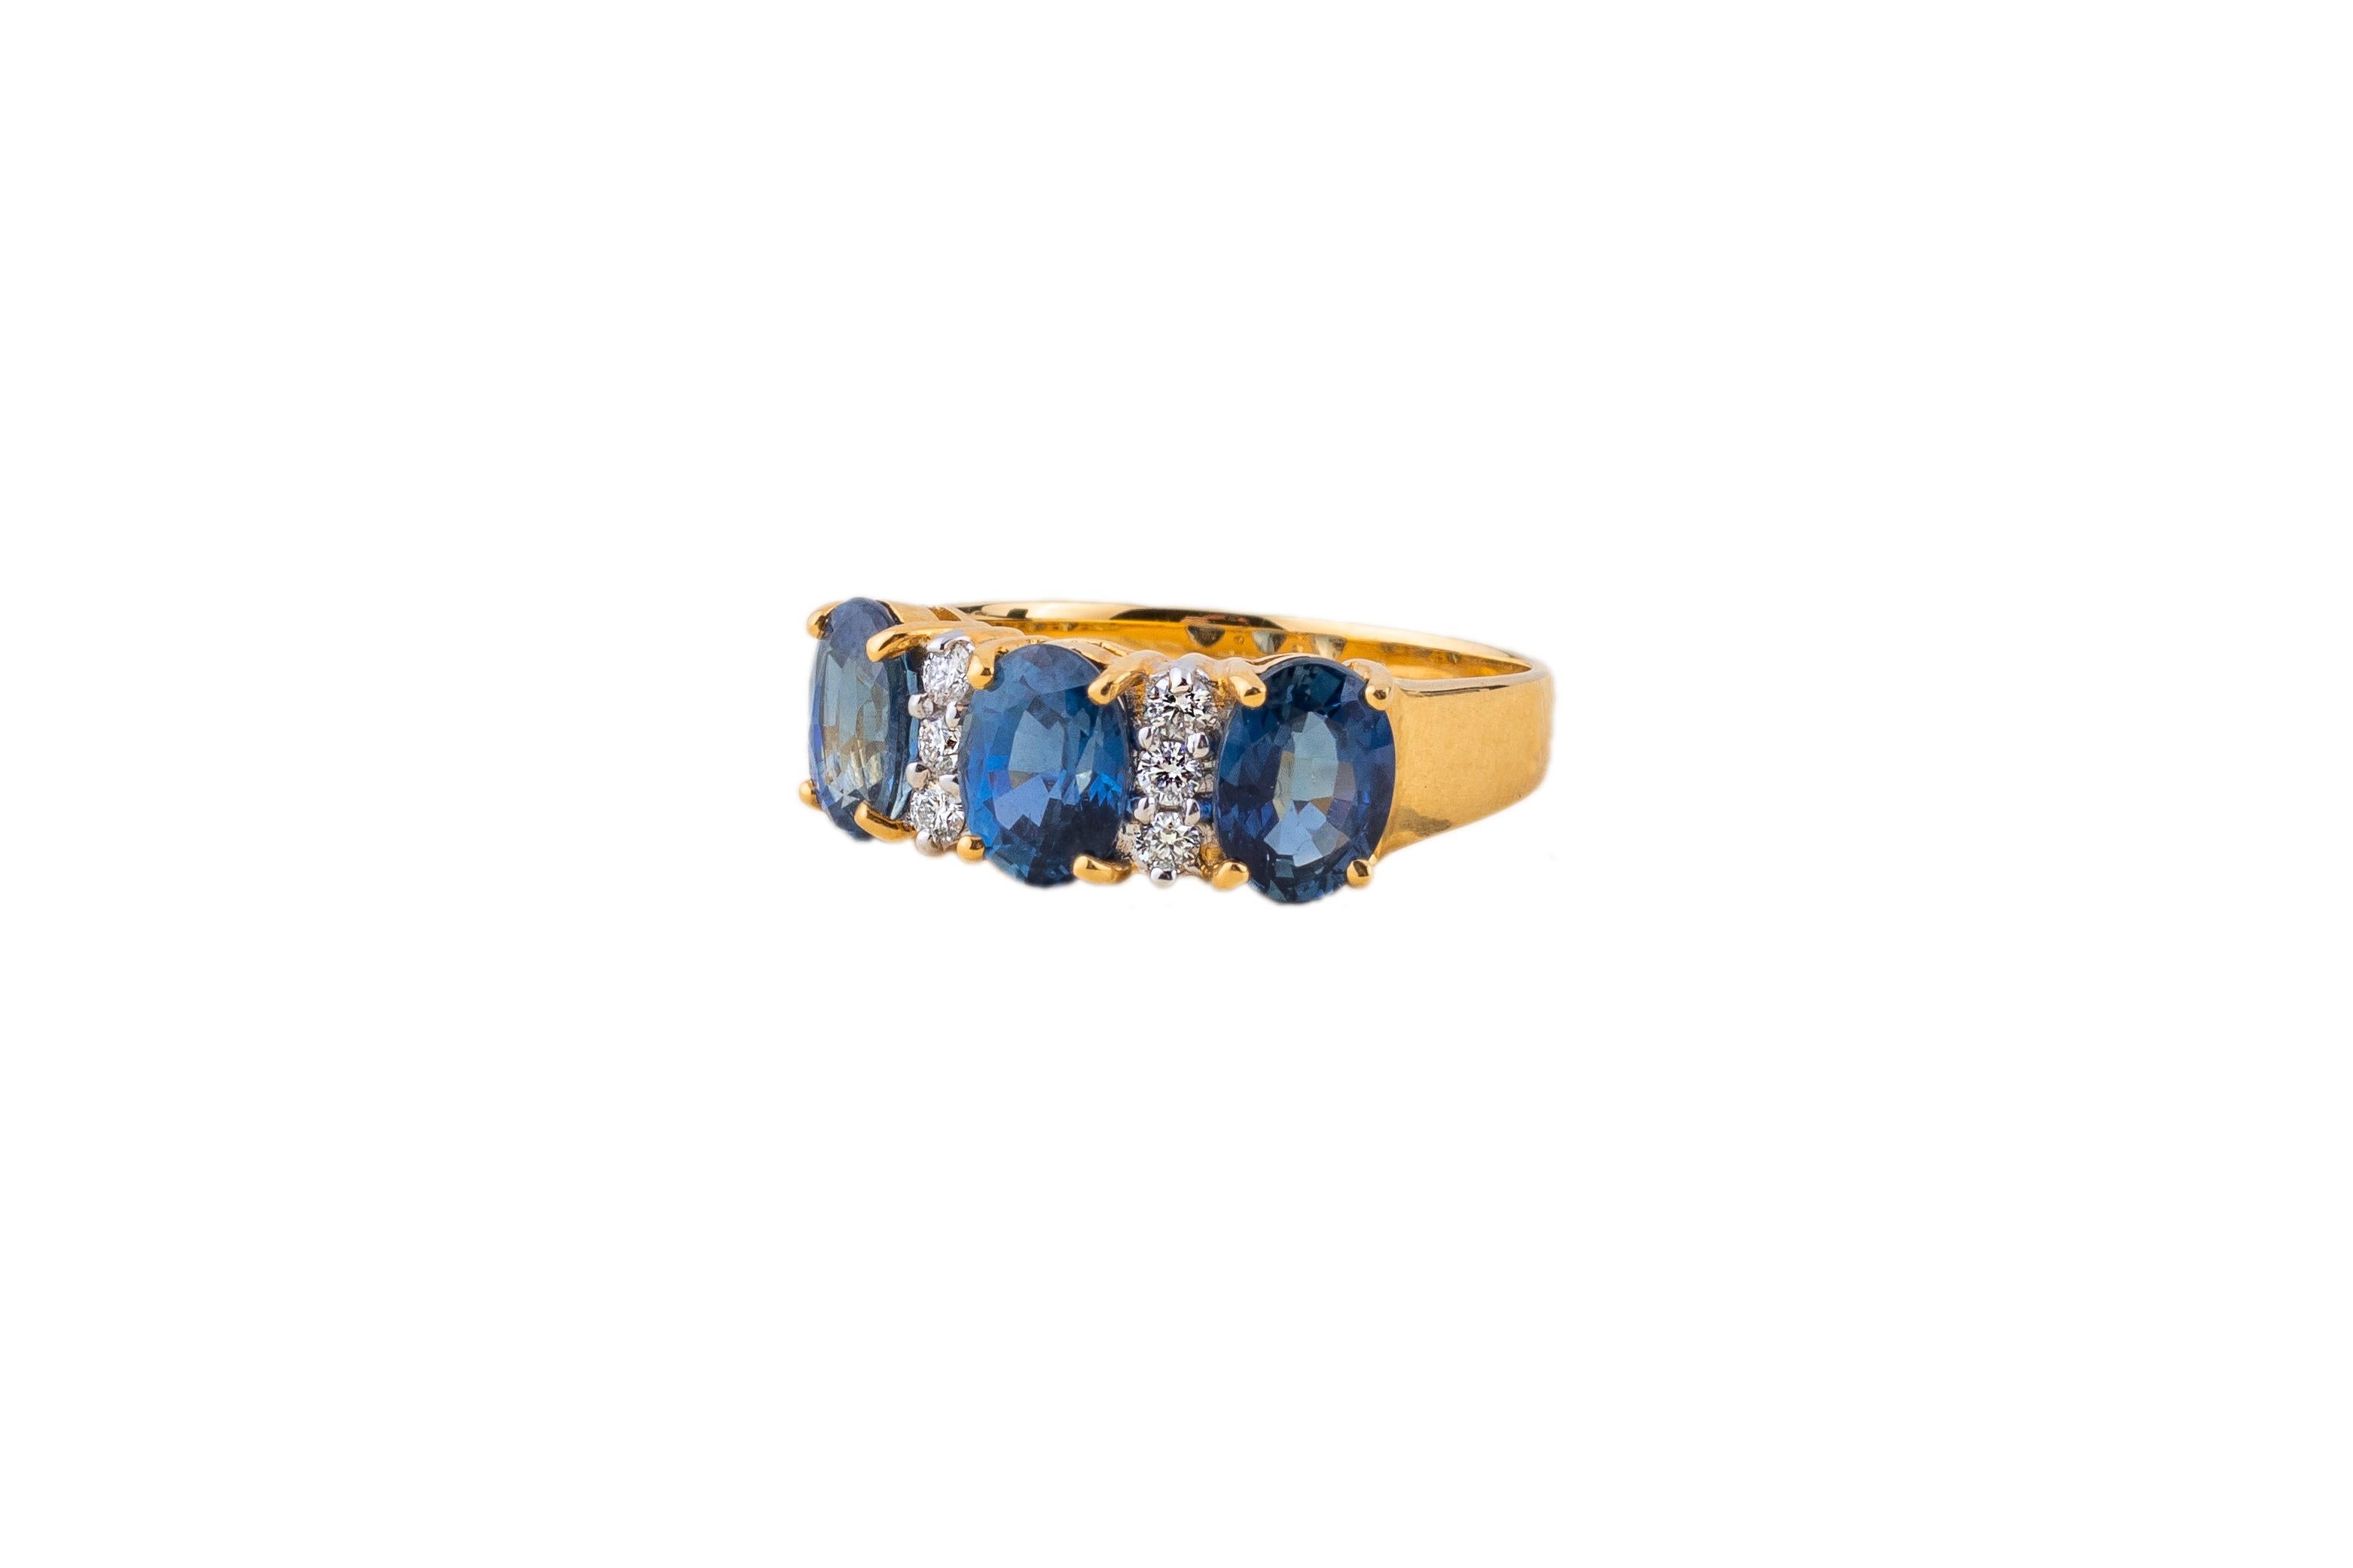 18 k yellow gold
stamped with the fineness 18k
3 sapphires together 4.23 ct
6 diamonds together 0,13 ct
Ring size 7/ 54
Weight: 4,7 gram